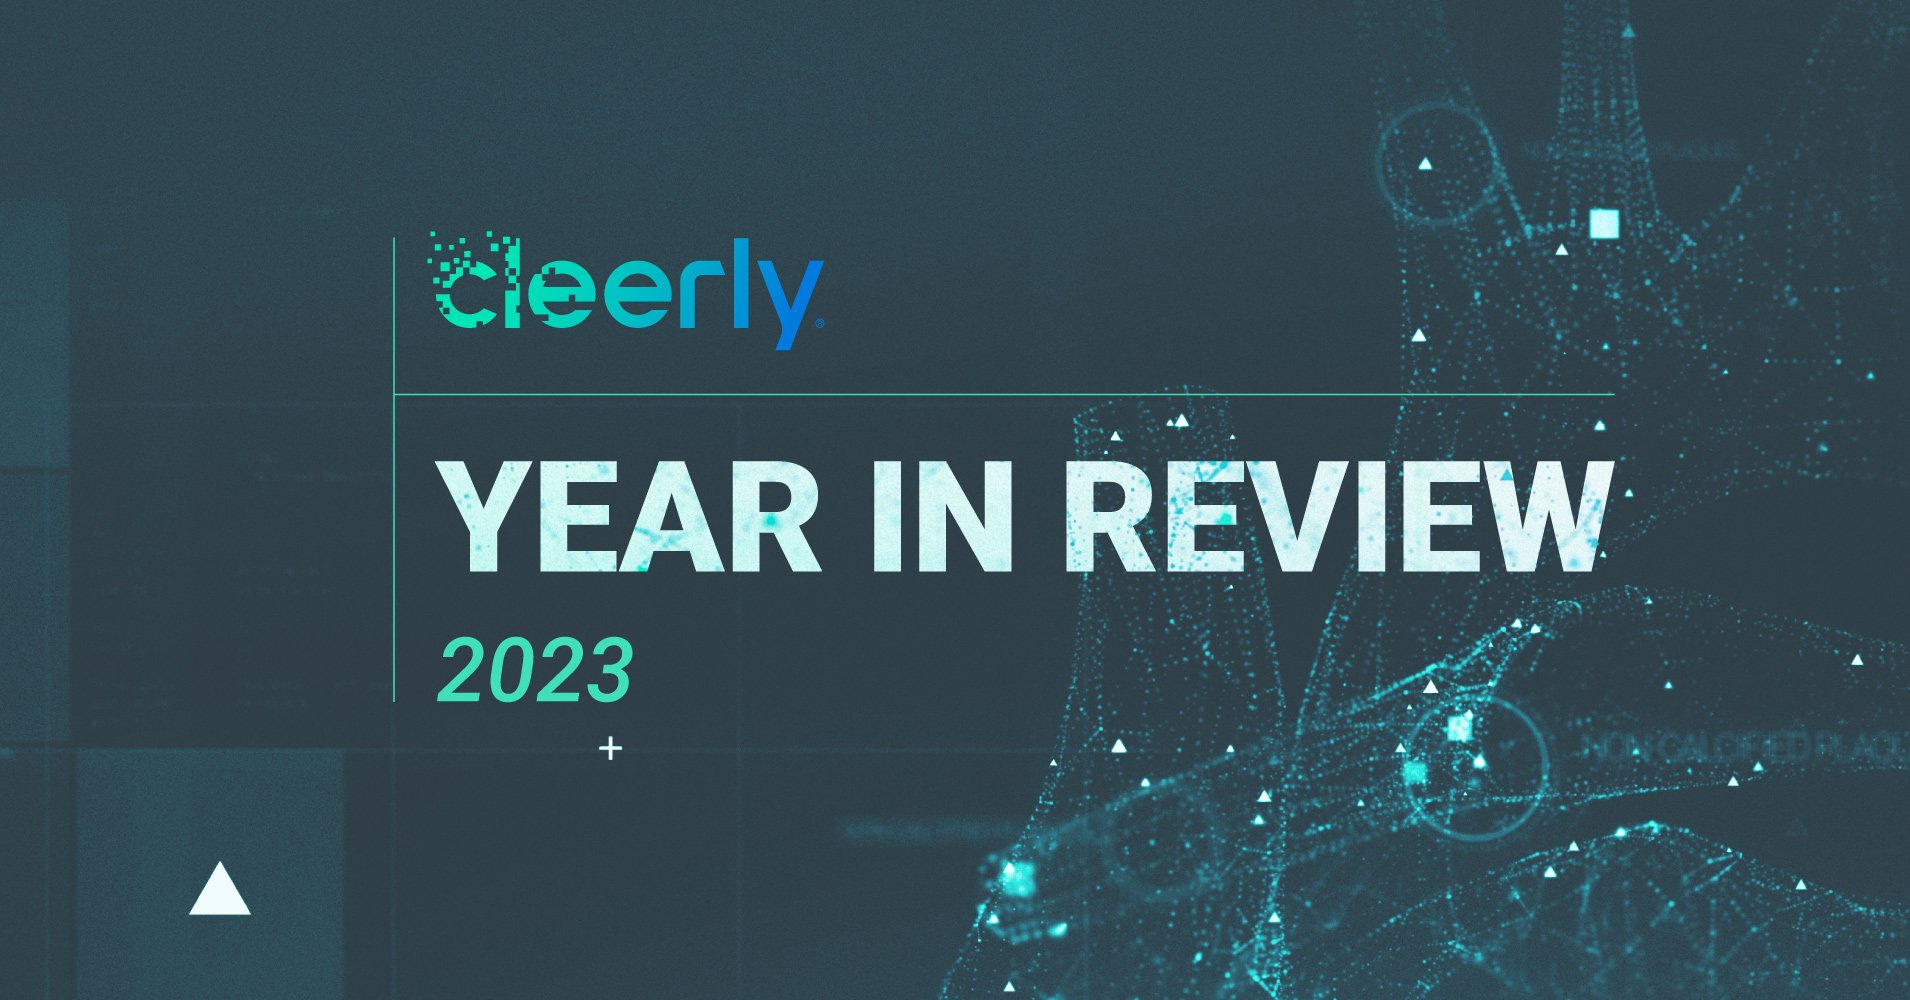 Cleerly's 2023 Year in Review